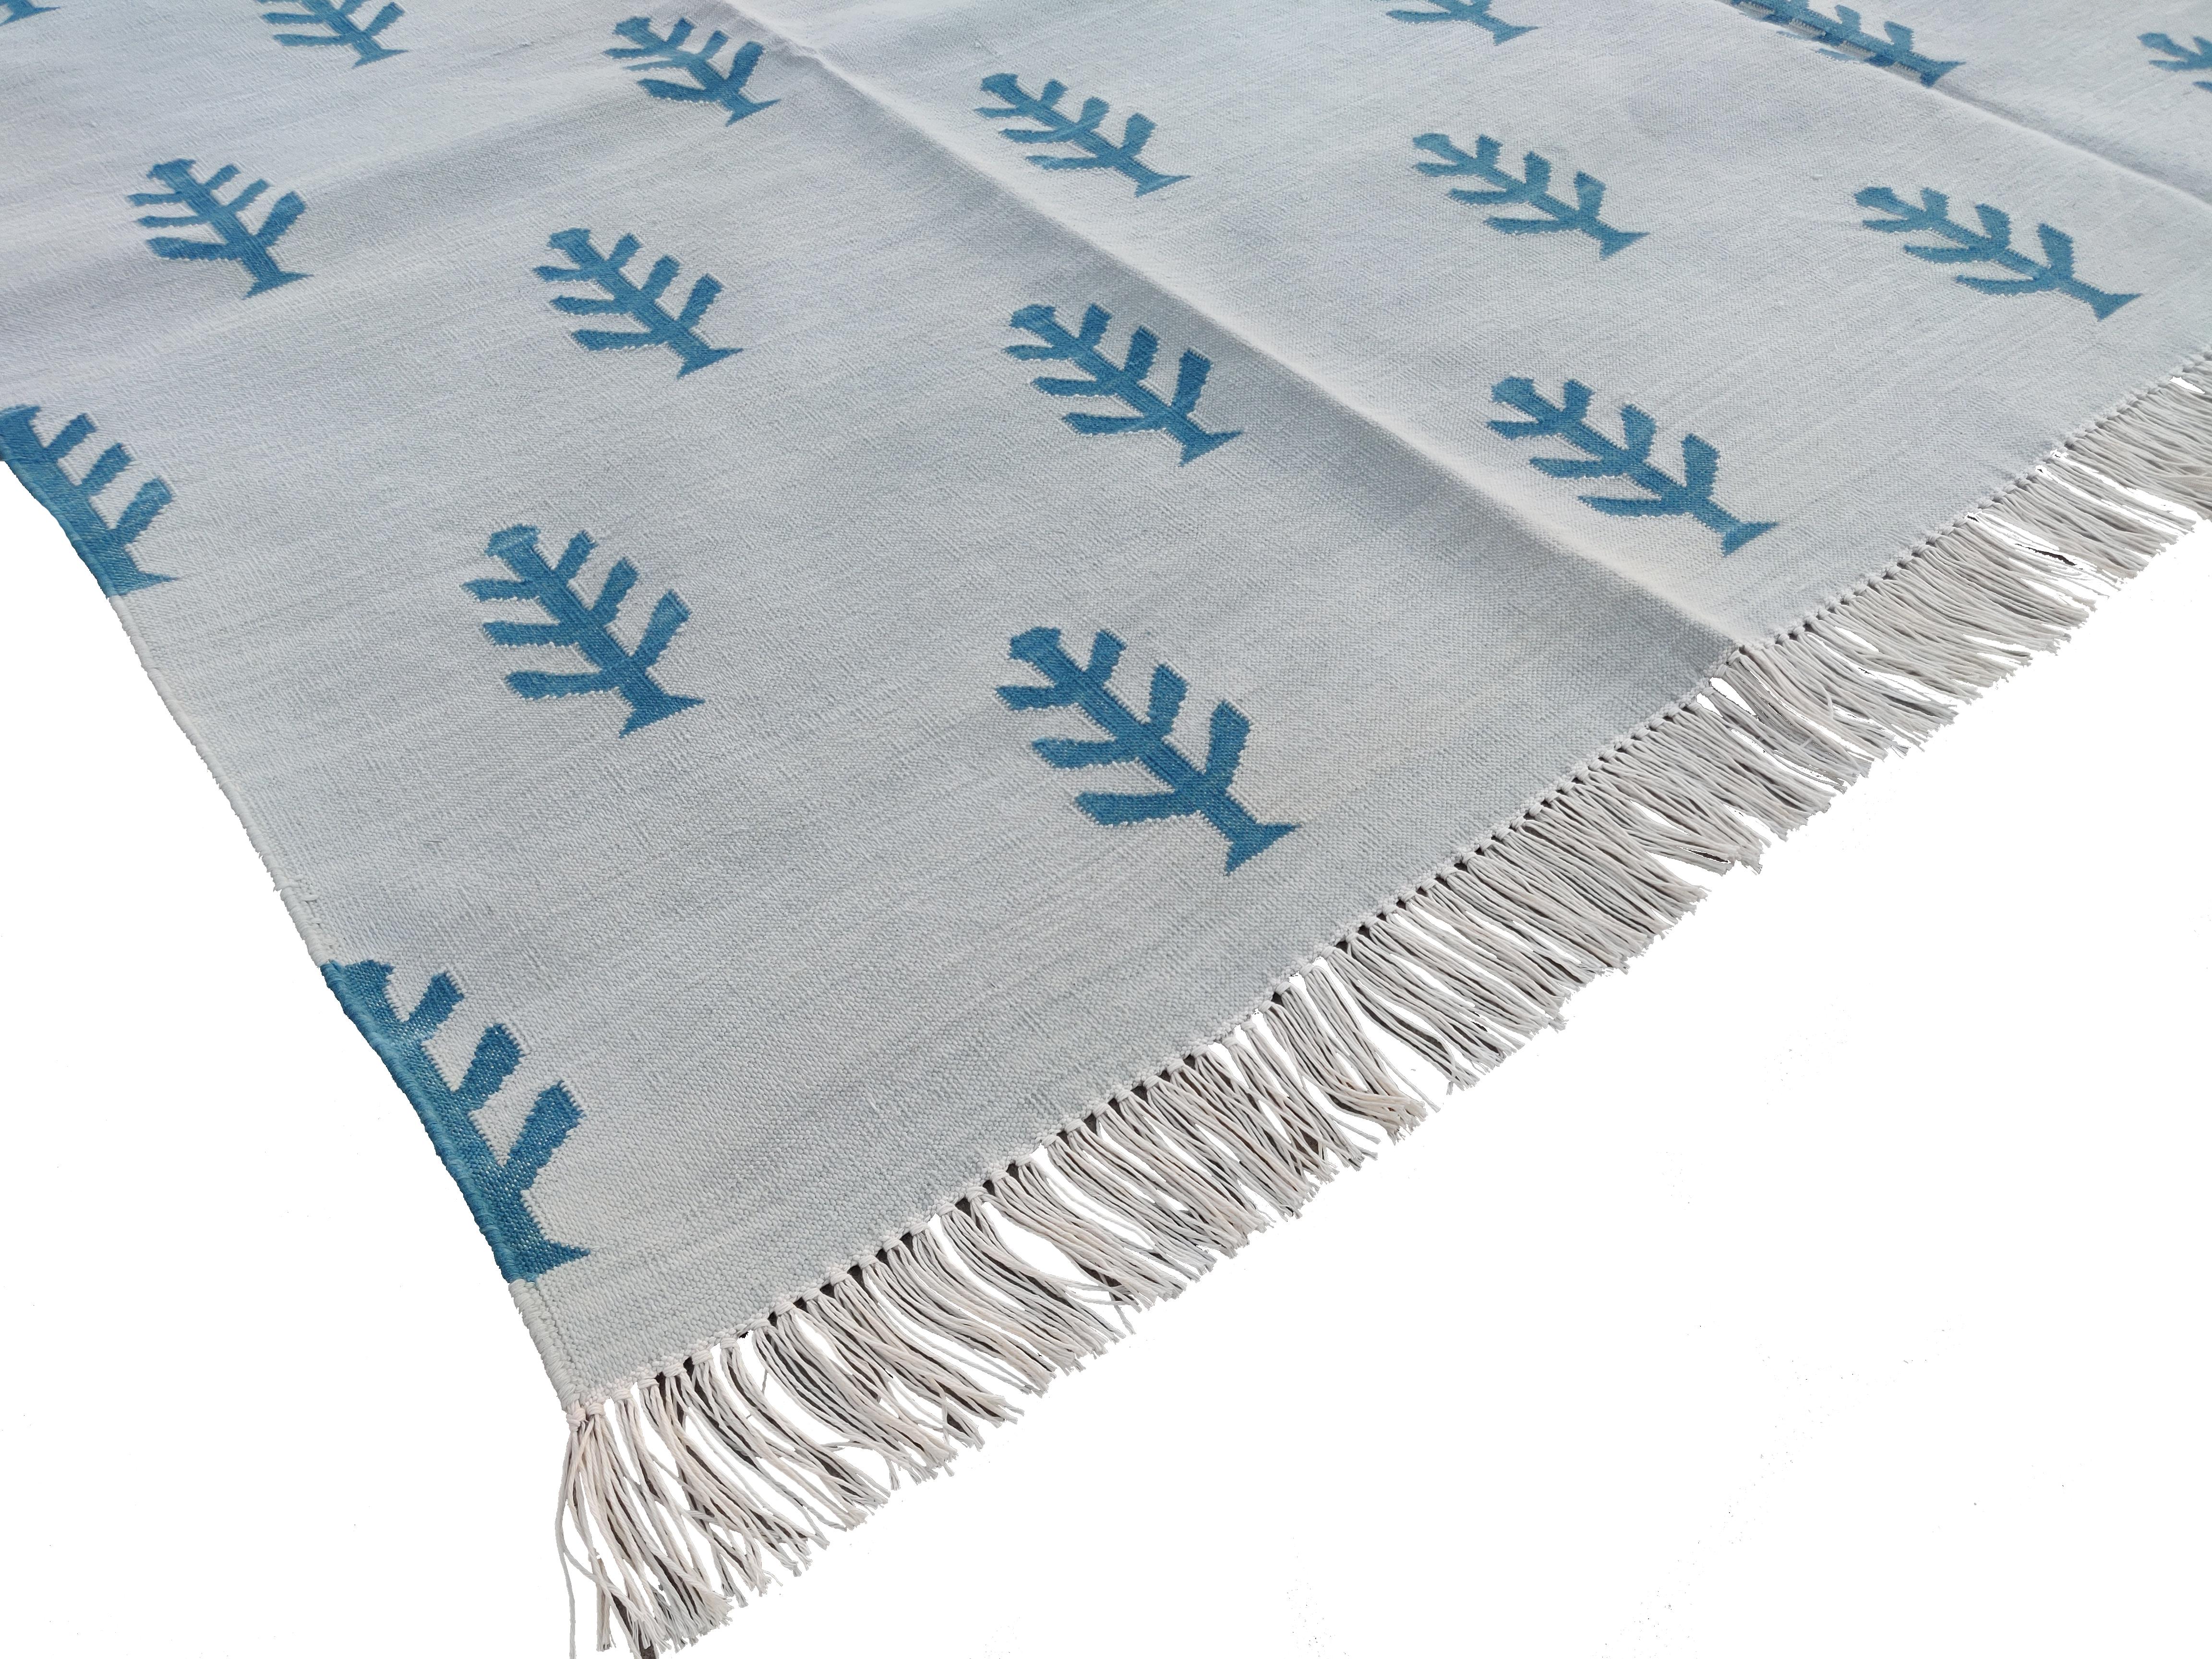 Hand-Woven Handmade Cotton Area Flat Weave Rug, Grey & White Tree Patterned Indian Dhurrie For Sale